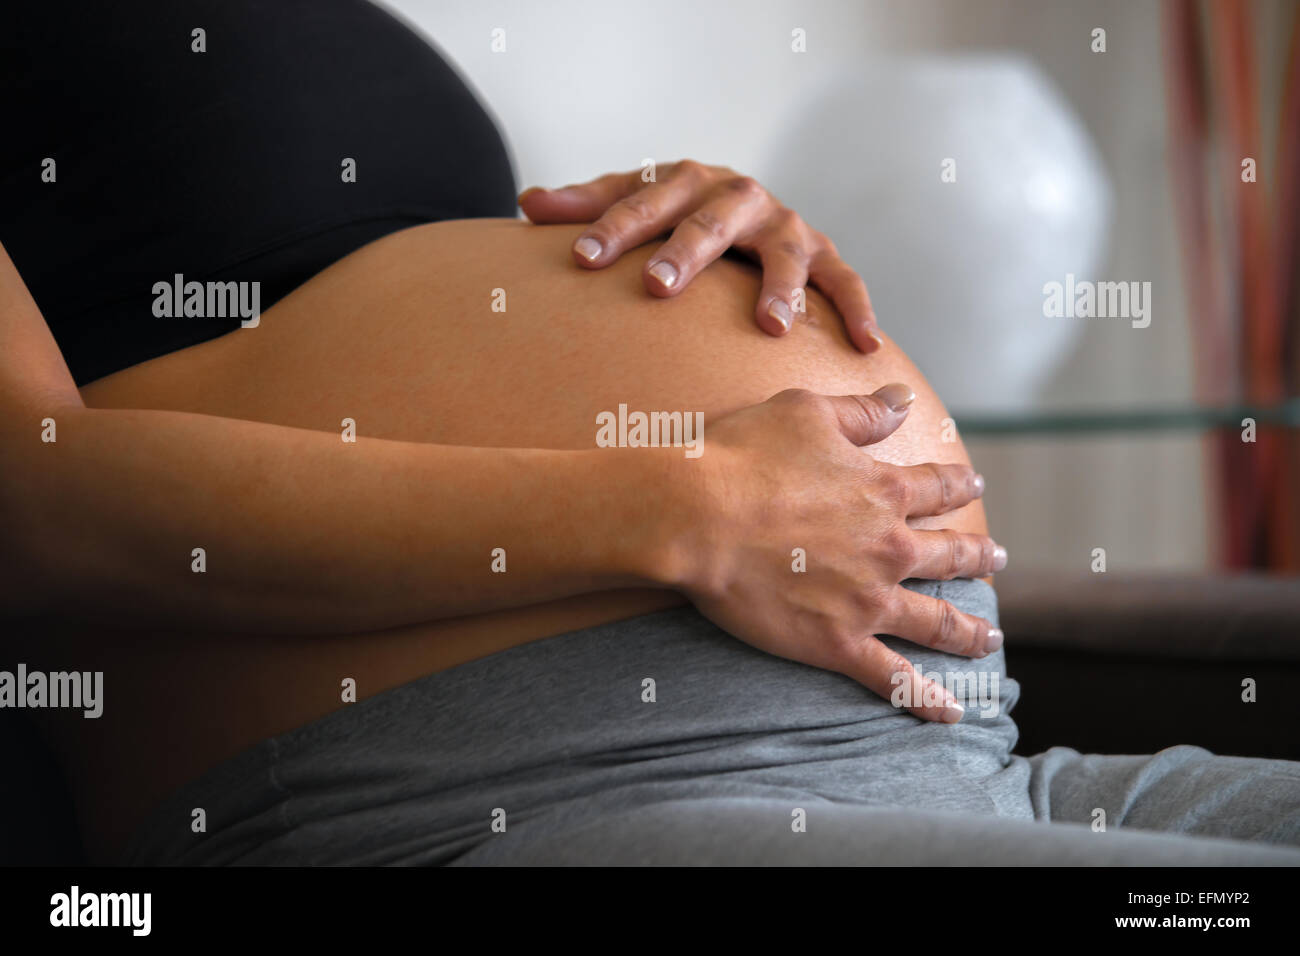 Baby bump, Image of 8 month pregnant woman sitting on a couch holding her belly Stock Photo